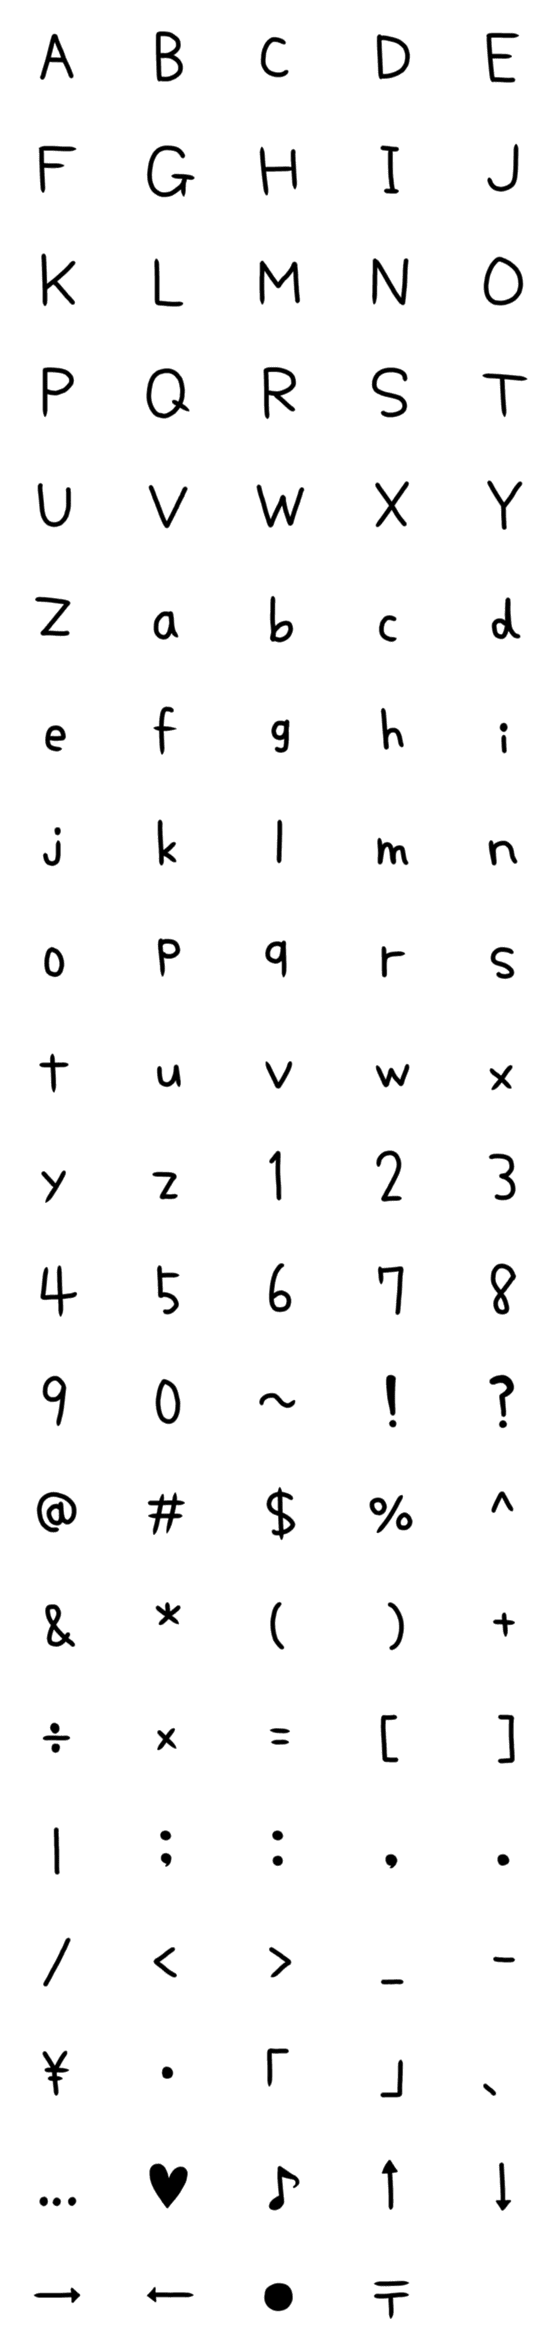 [LINE絵文字]□てがき文字 英数字の画像一覧